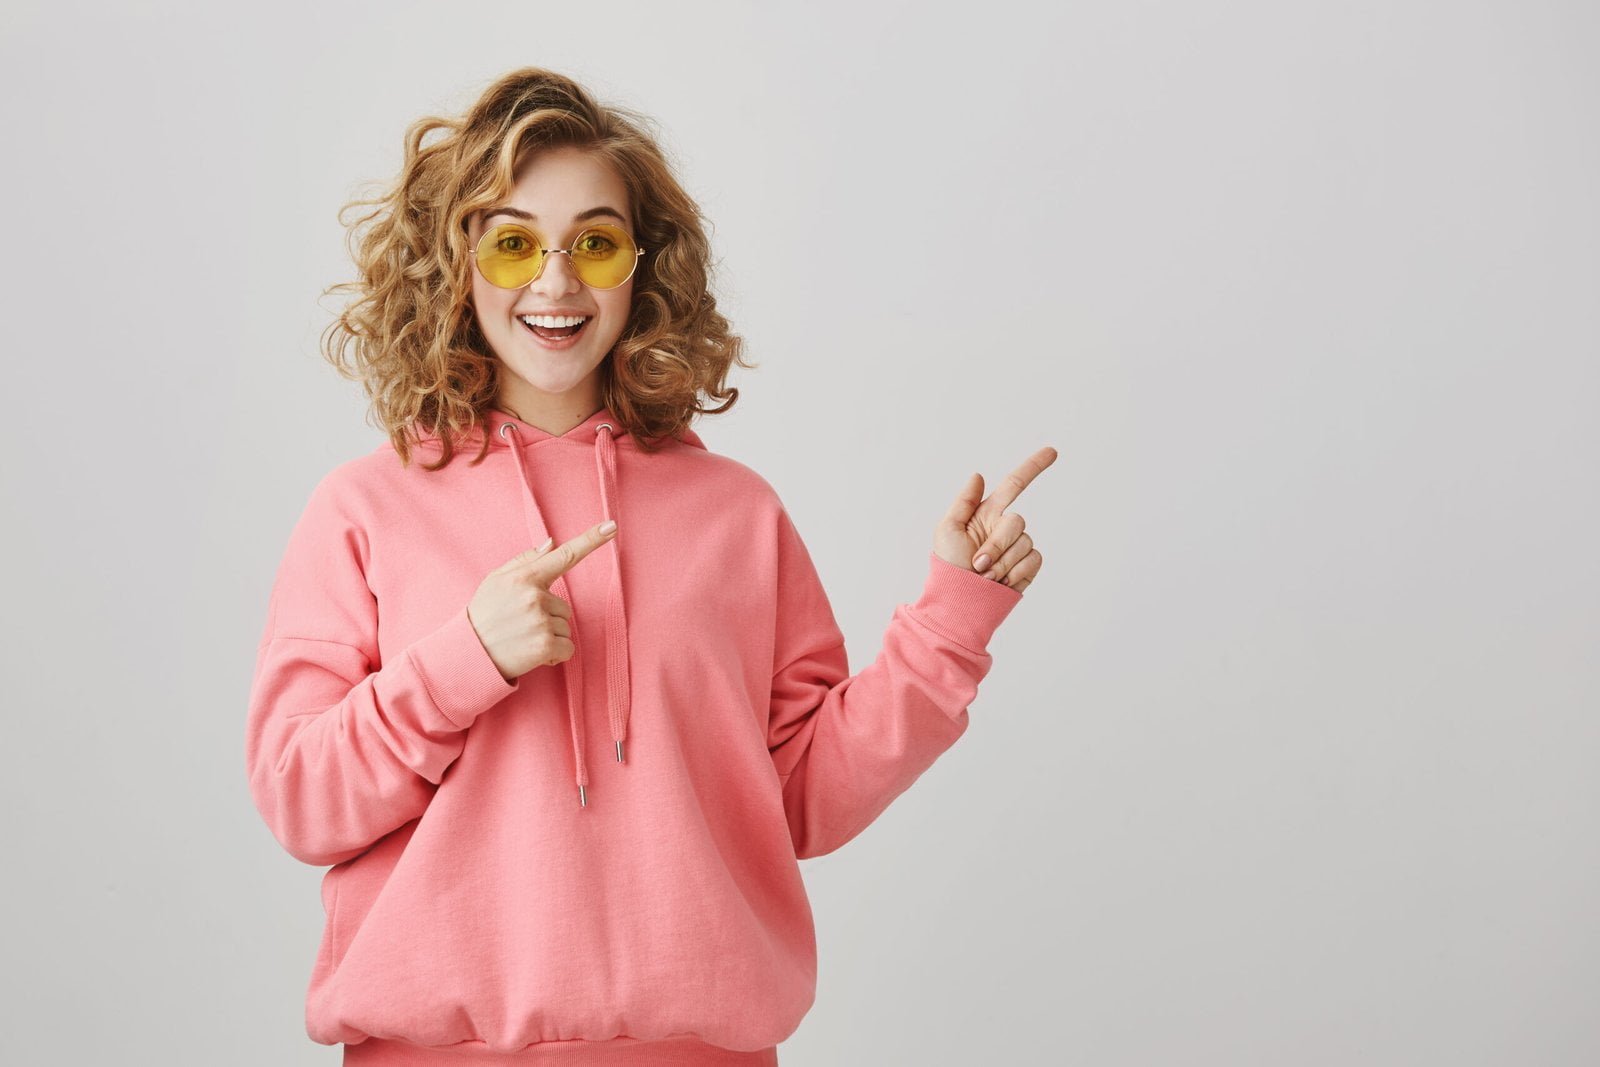 excited-stylish-curly-haired-girl-sunglasses-pointing-right-showing-way-scaled.jpg